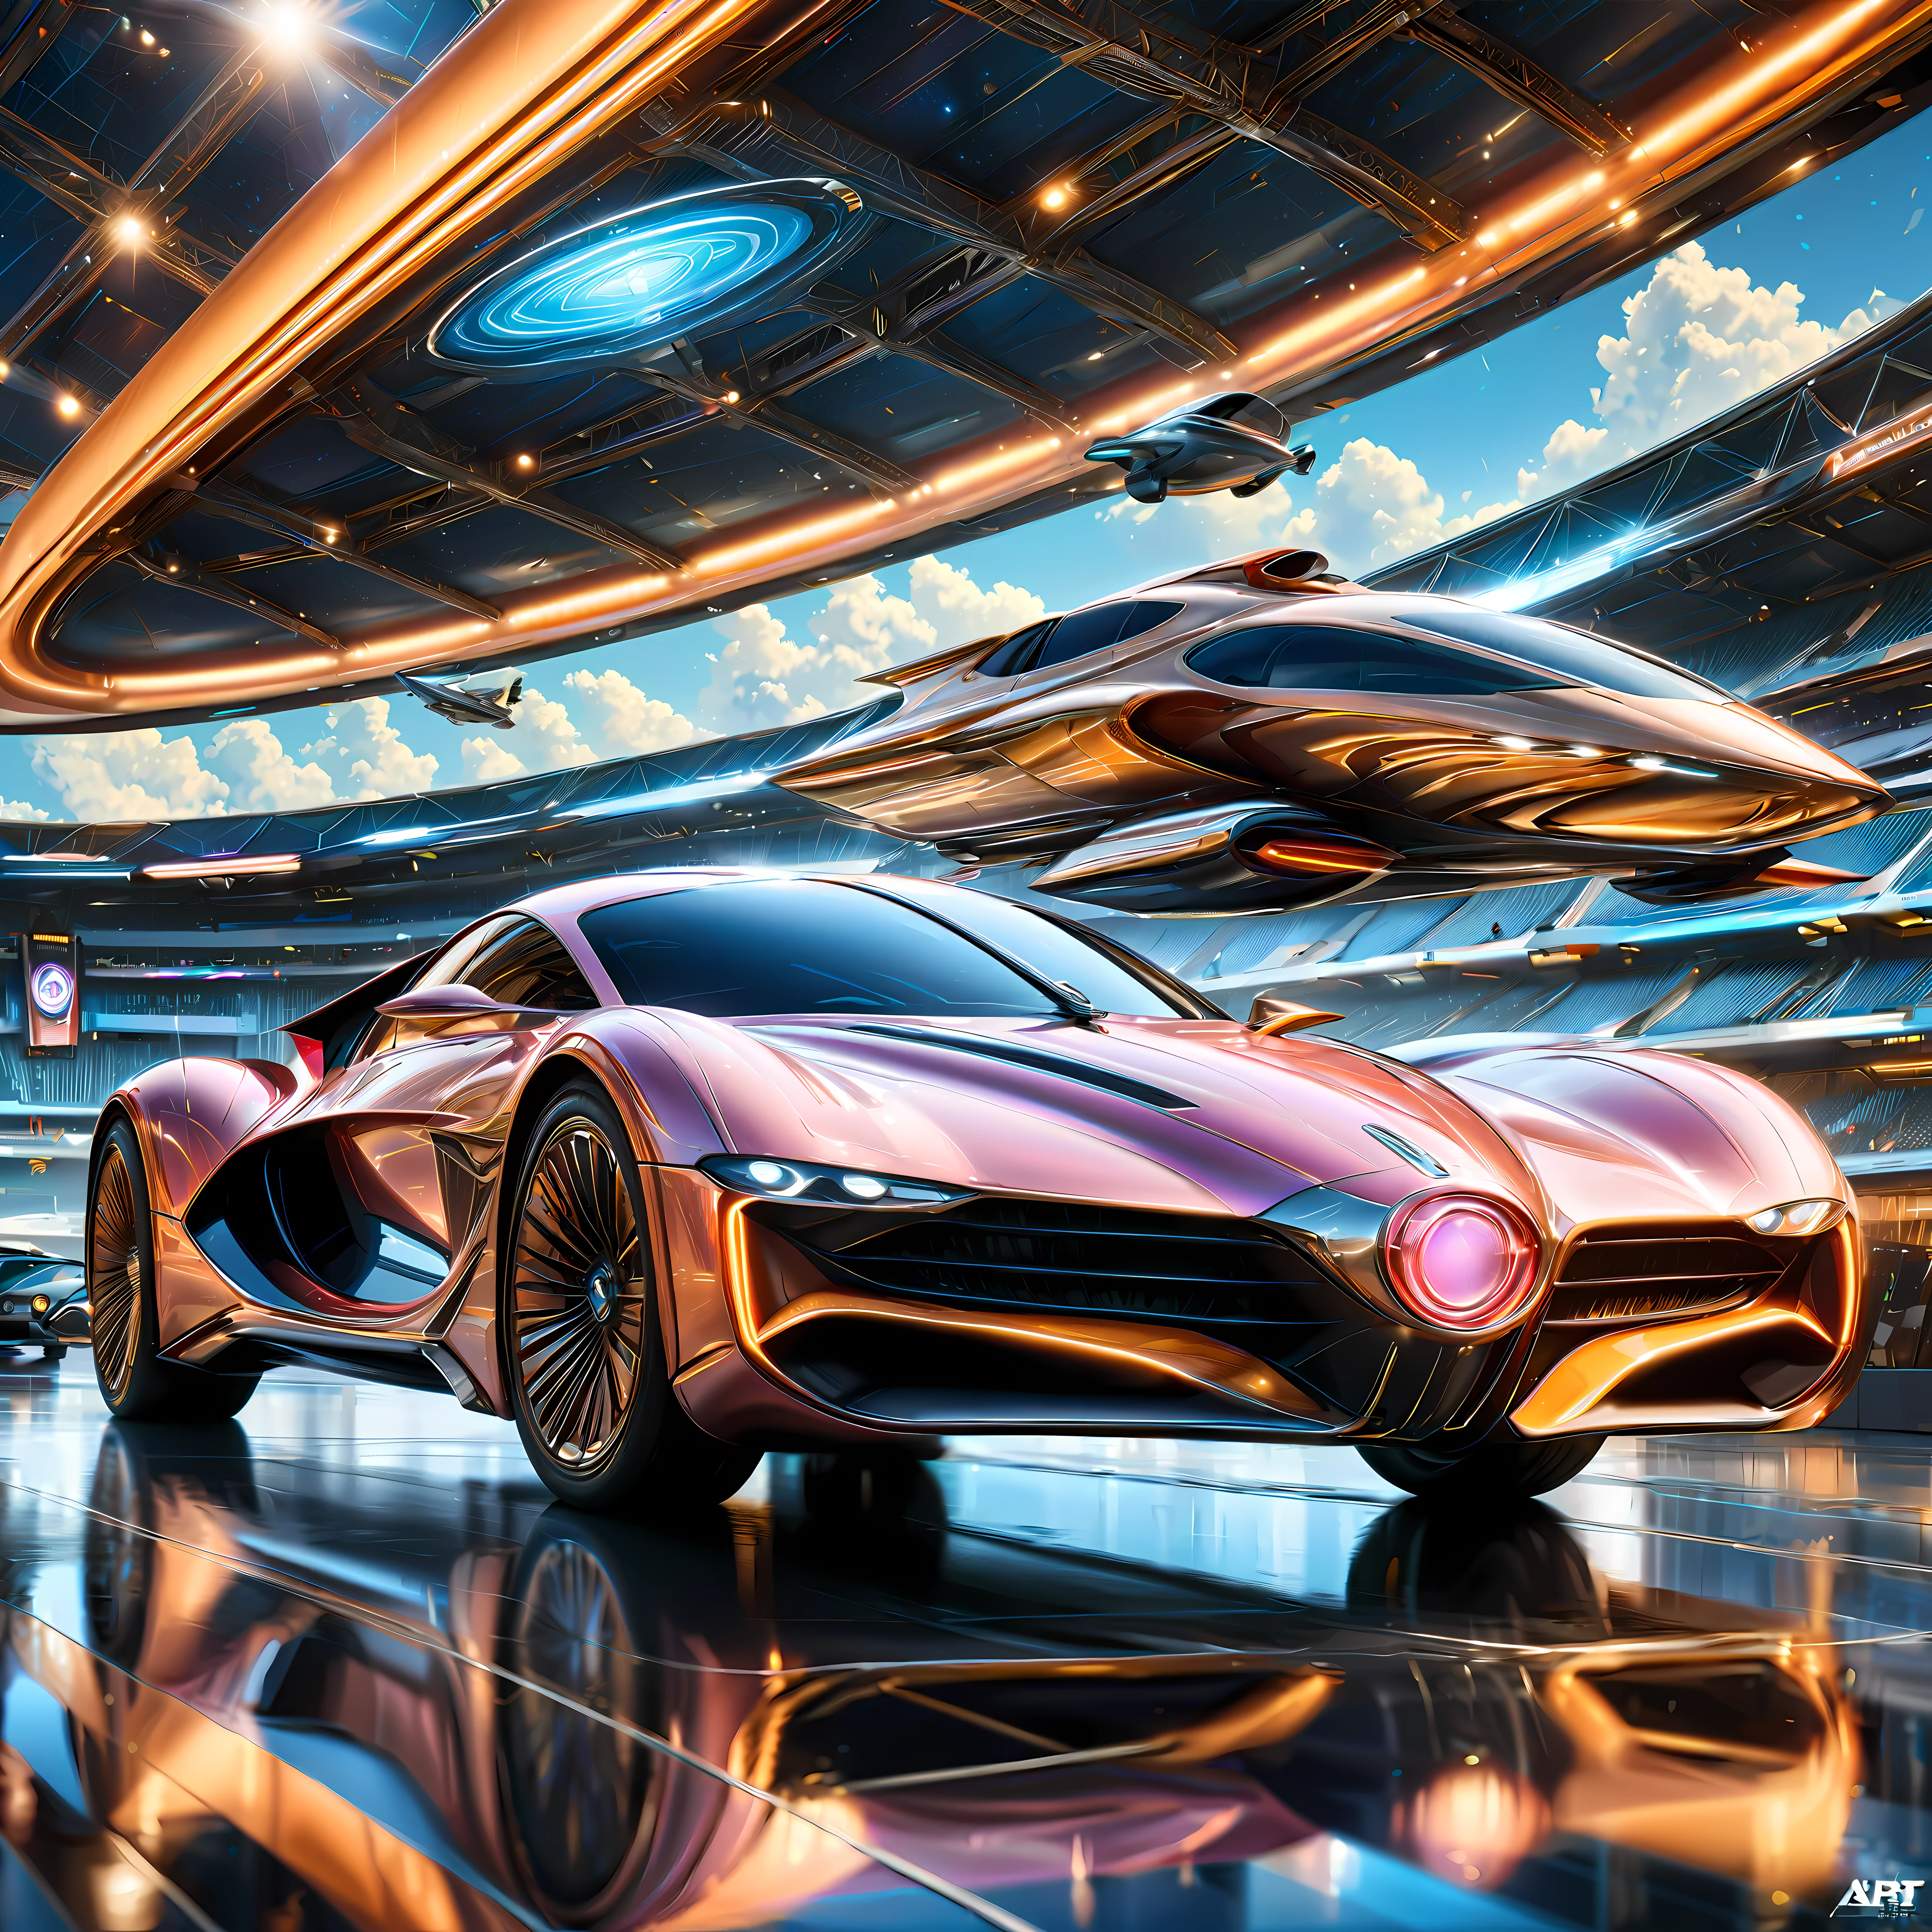 ((art deco style flying race car):1.5), art deco style science fiction, background is futuristic stadium, ((futuristic stadium):1.2) (best quality,4k,8k,highres,masterpiece:1.2),ultra-detailed,(realistic,photorealistic,photo-realistic:1.37),HDR,UHD,studio lighting,ultra-fine painting,sharp focus,physically-based rendering,extreme detail description,professional,vivid colors,bokeh.

All captured with sharp focus. Rendered in ultra-high definition with UHD and retina quality, this masterpiece ensures anatomical correctness and textured skin with super detail. With a focus on high quality and accuracy, this award-winning portrayal captures every nuance in stunning 16k resolution, immersing viewers in its lifelike depiction. Avoid extreme angles or exaggerated expressions to maintain realism.